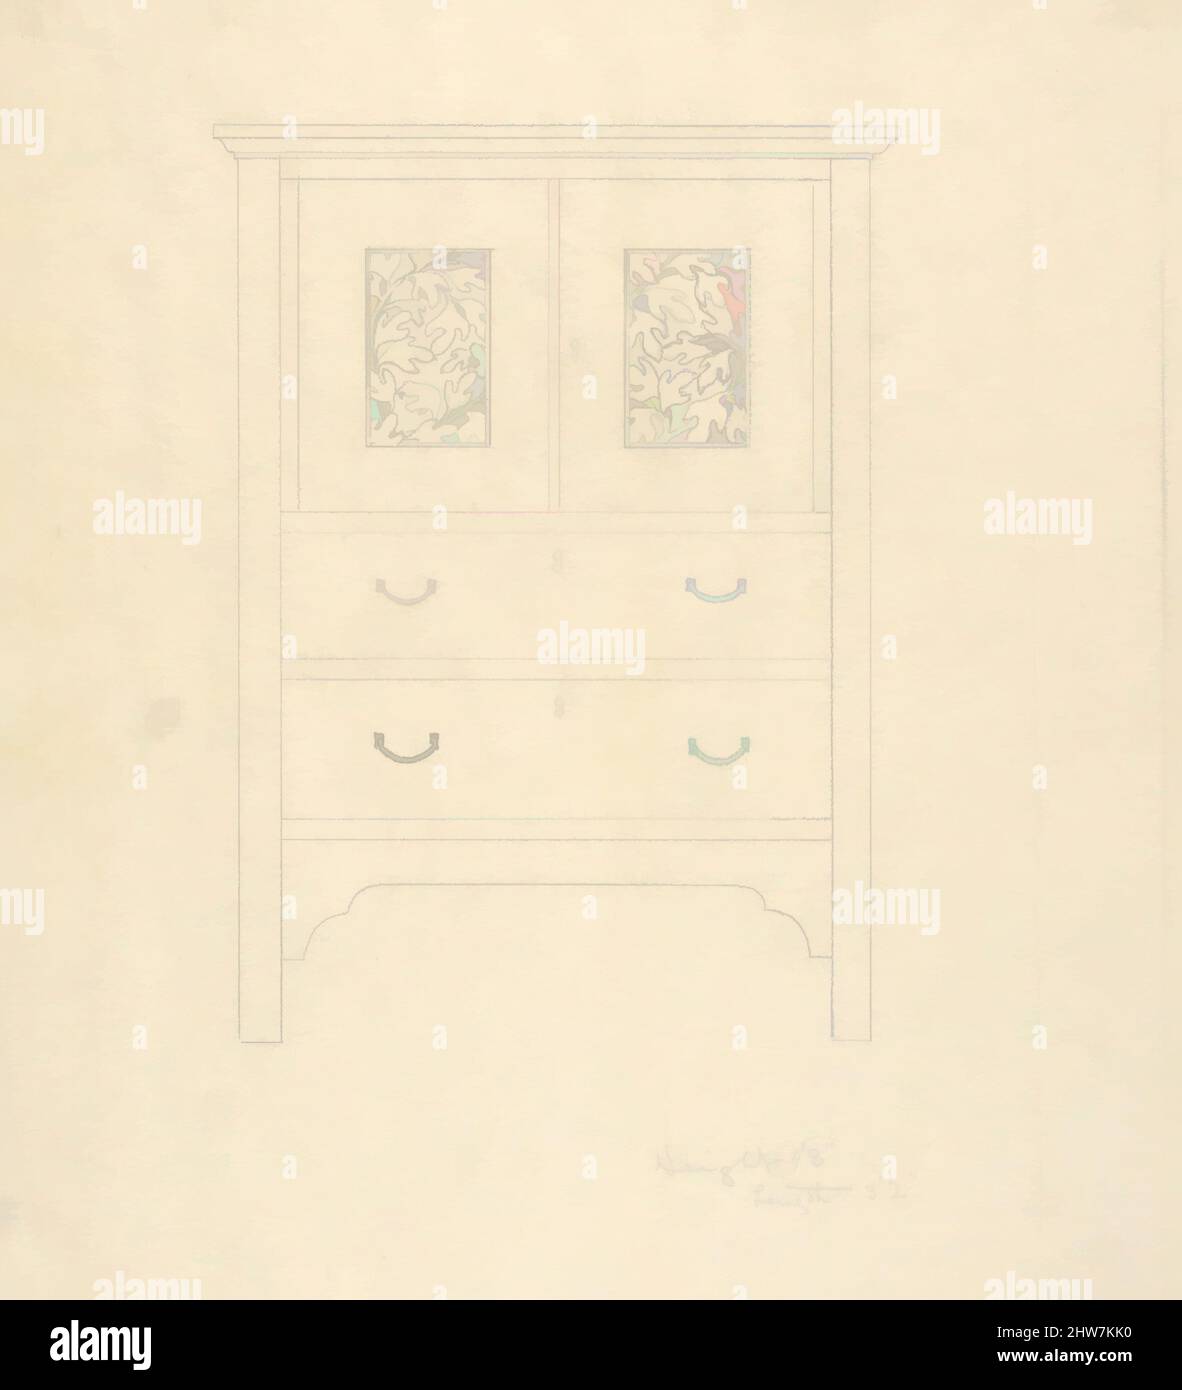 Art inspired by Outline Drawing of 'Sassafras Linen Press', 1904, Graphite, sheet: 10 11/16 x 9 3/16 in. (27.2 x 23.3 cm), Byrdcliffe Arts and Crafts Colony (American, 1902–1915), Ralph Radcliffe Whitehead (American (born England), Yorkshire 1854–1929 Santa Barbara, California, Classic works modernized by Artotop with a splash of modernity. Shapes, color and value, eye-catching visual impact on art. Emotions through freedom of artworks in a contemporary way. A timeless message pursuing a wildly creative new direction. Artists turning to the digital medium and creating the Artotop NFT Stock Photo